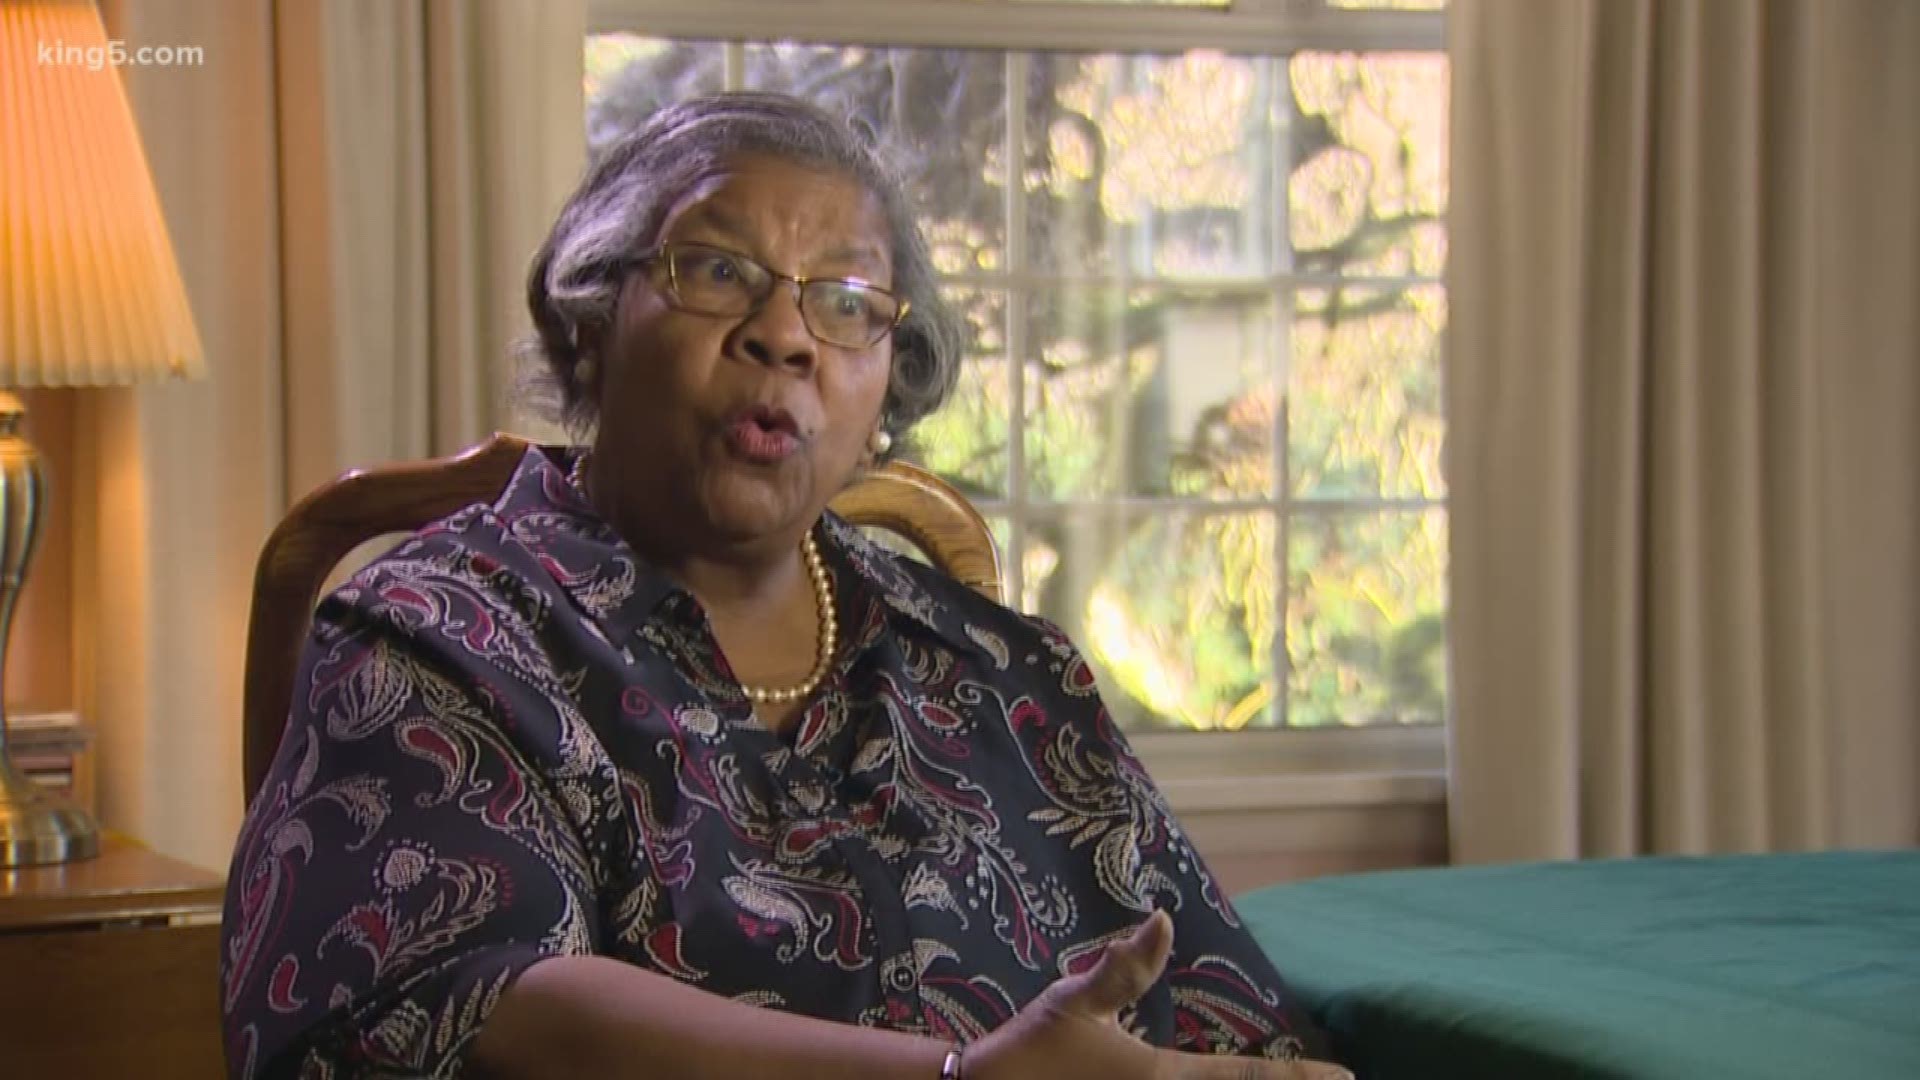 KING 5's Kaci Aitchison spoke with Dr. Thelma Jackson, an educator and advocate with 40 years of experience in schools at the local and state level. She talked about how to solve inequities in education.